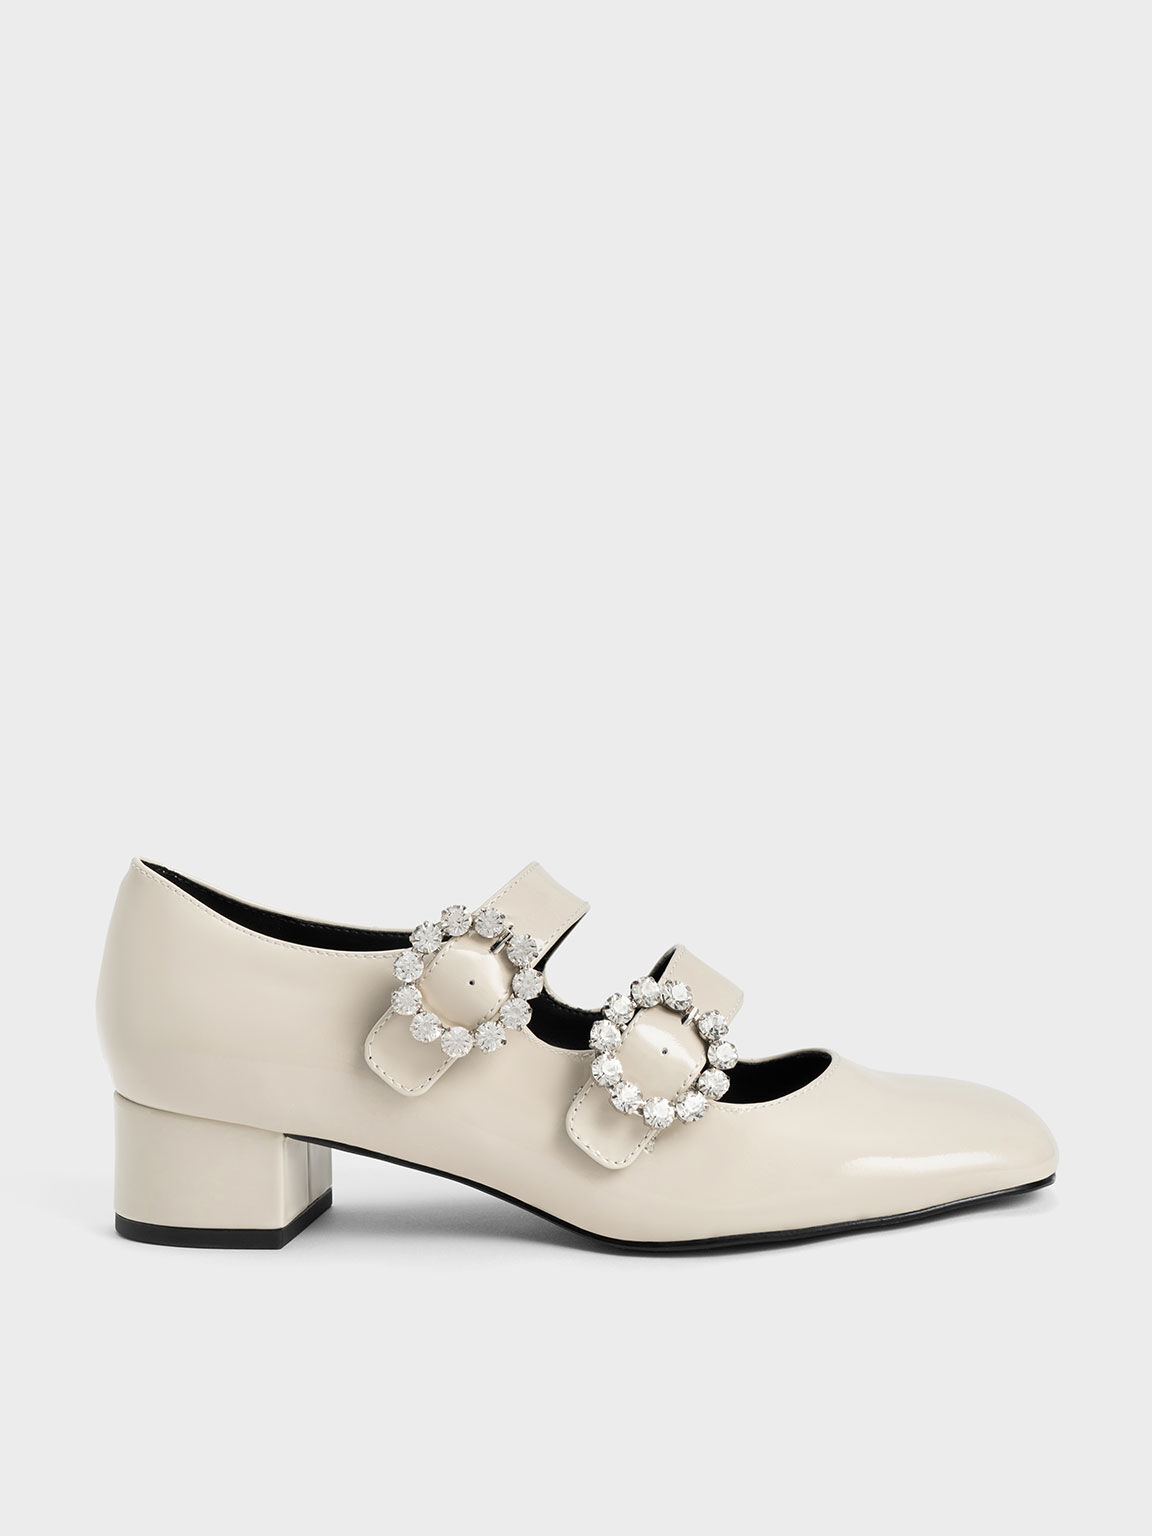 Embellished Buckle Patent Mary Janes, Chalk, hi-res